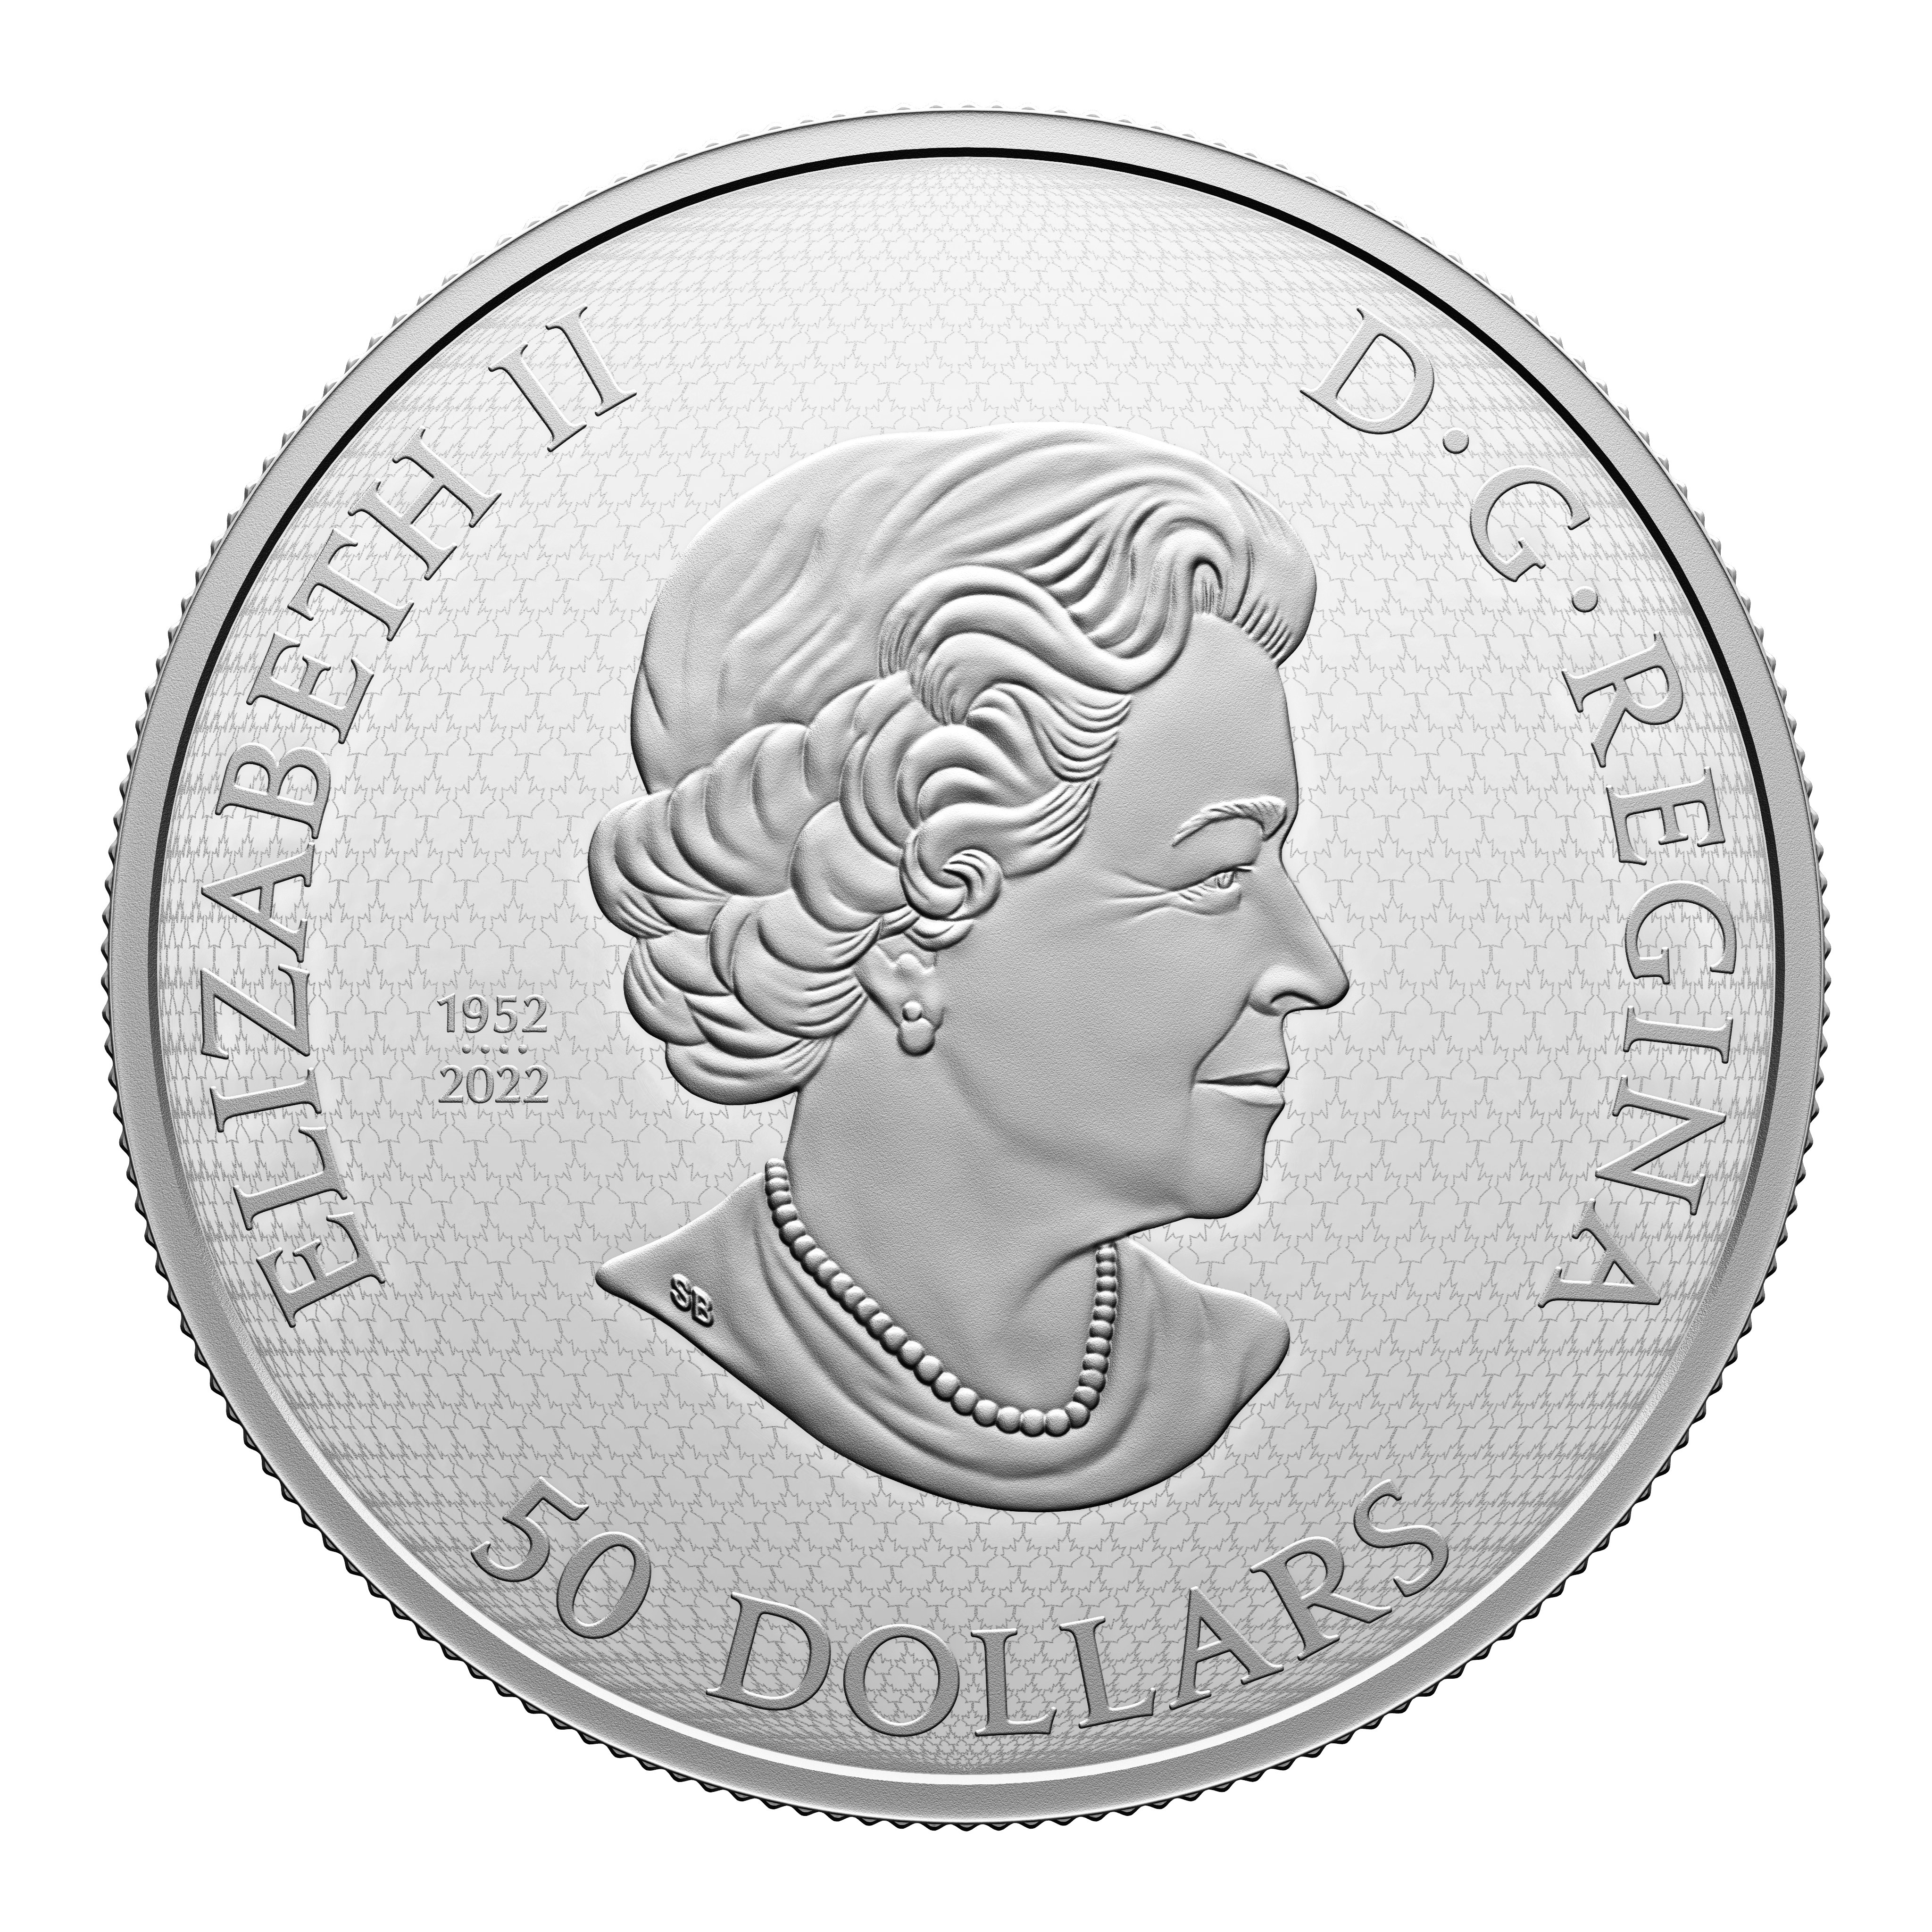 THE MONARCH AND THE BLOOM 5 Oz Silver Coin $50 Canada 2023 - PARTHAVA COIN